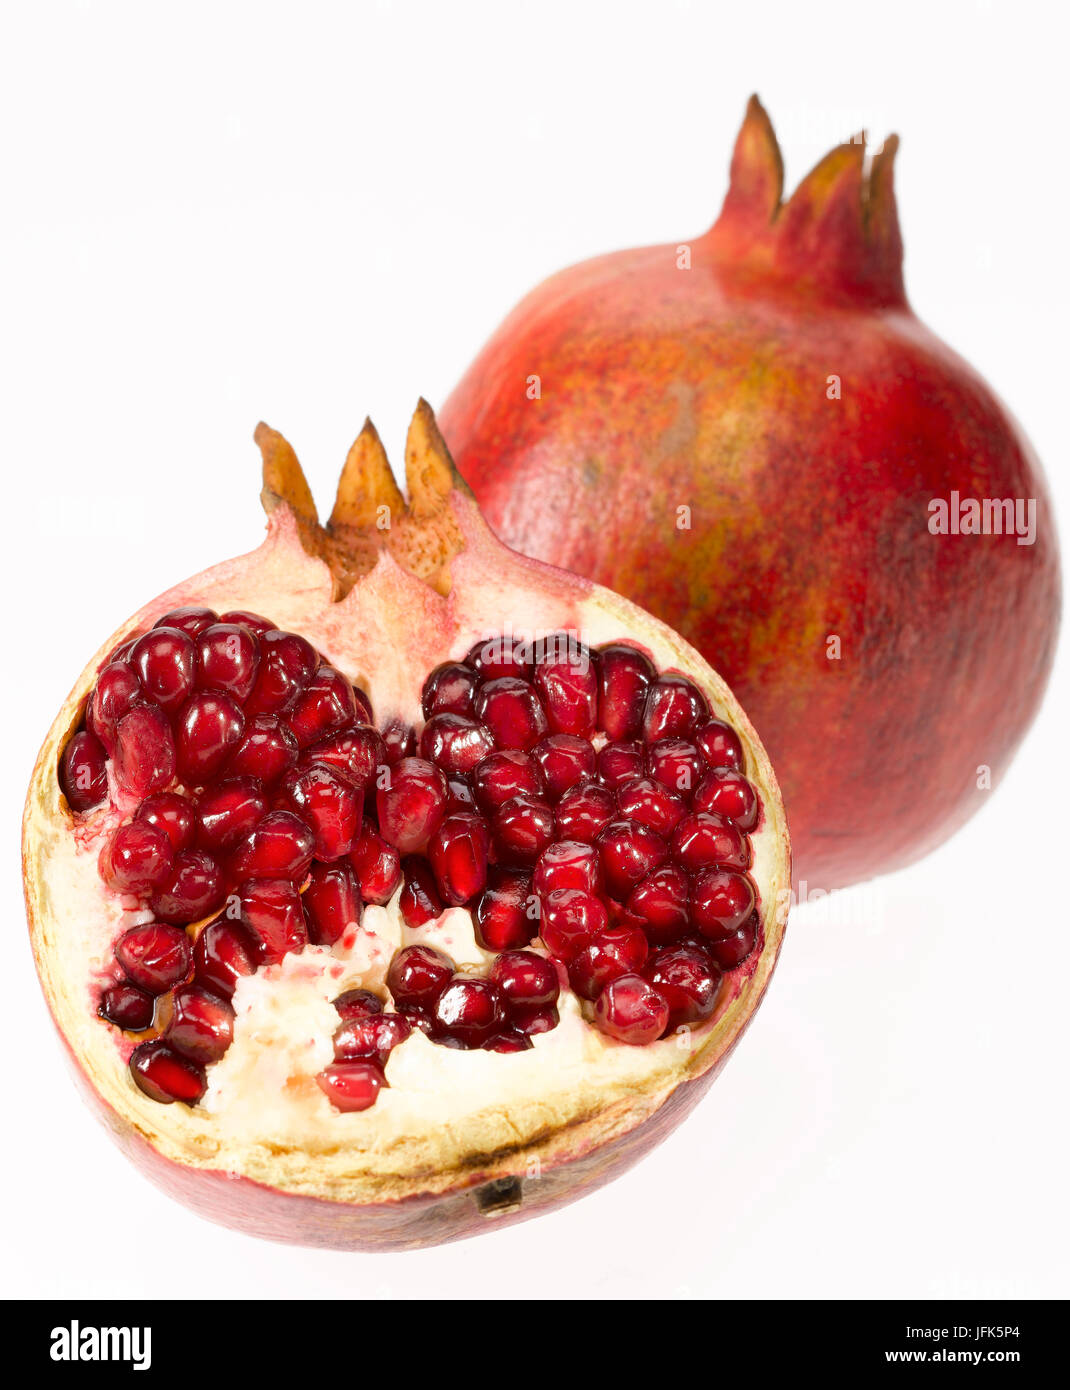 Pomegranate with seeds Stock Photo